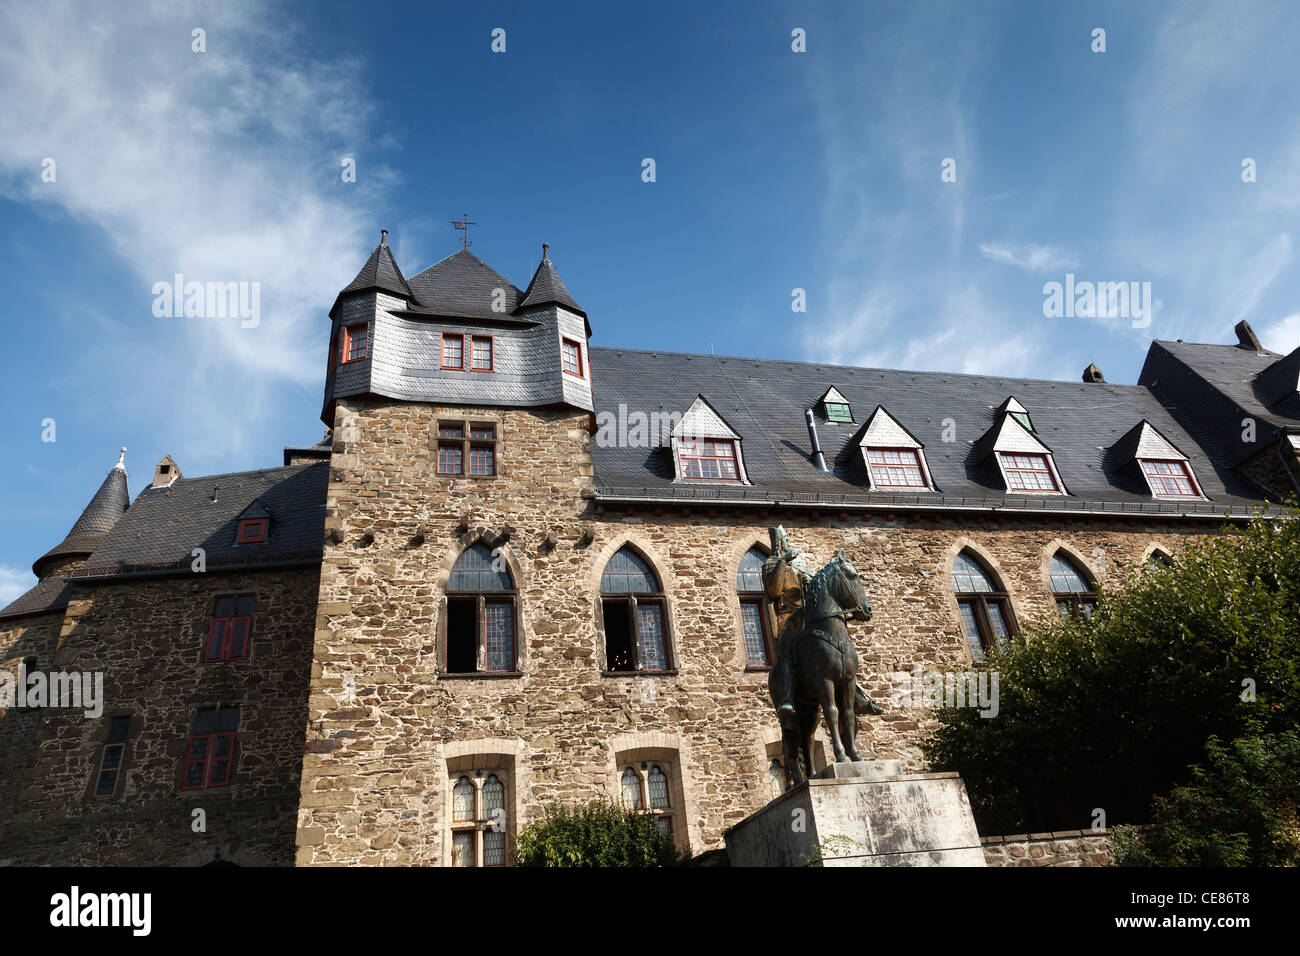 The German Burg Castle / Schloss Burg in Solingen is the largest reconstructed castle in North Rhine-Westphalia. Stock Photo